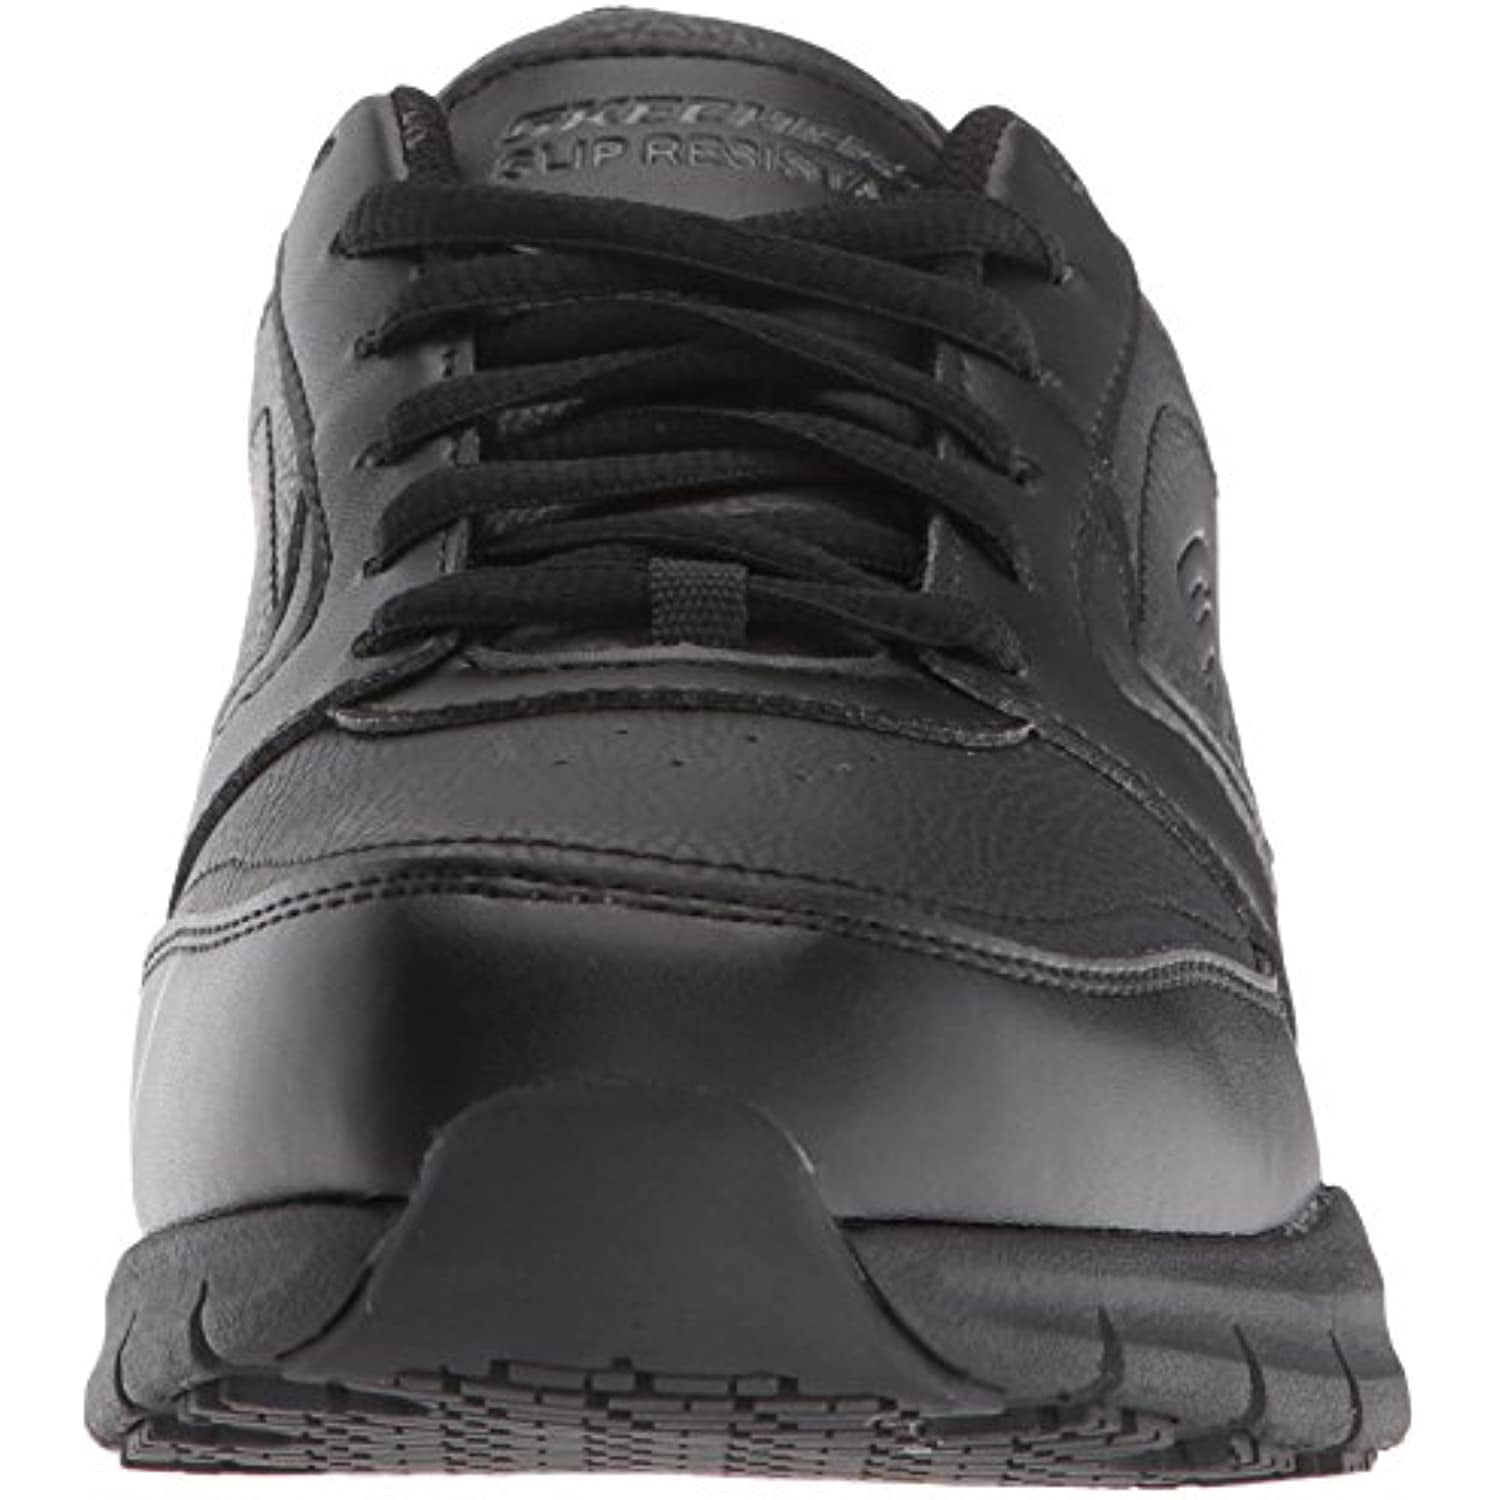 Skechers Work Women's Nampa - Wyola Slip Resistant Lace Up Work Shoes